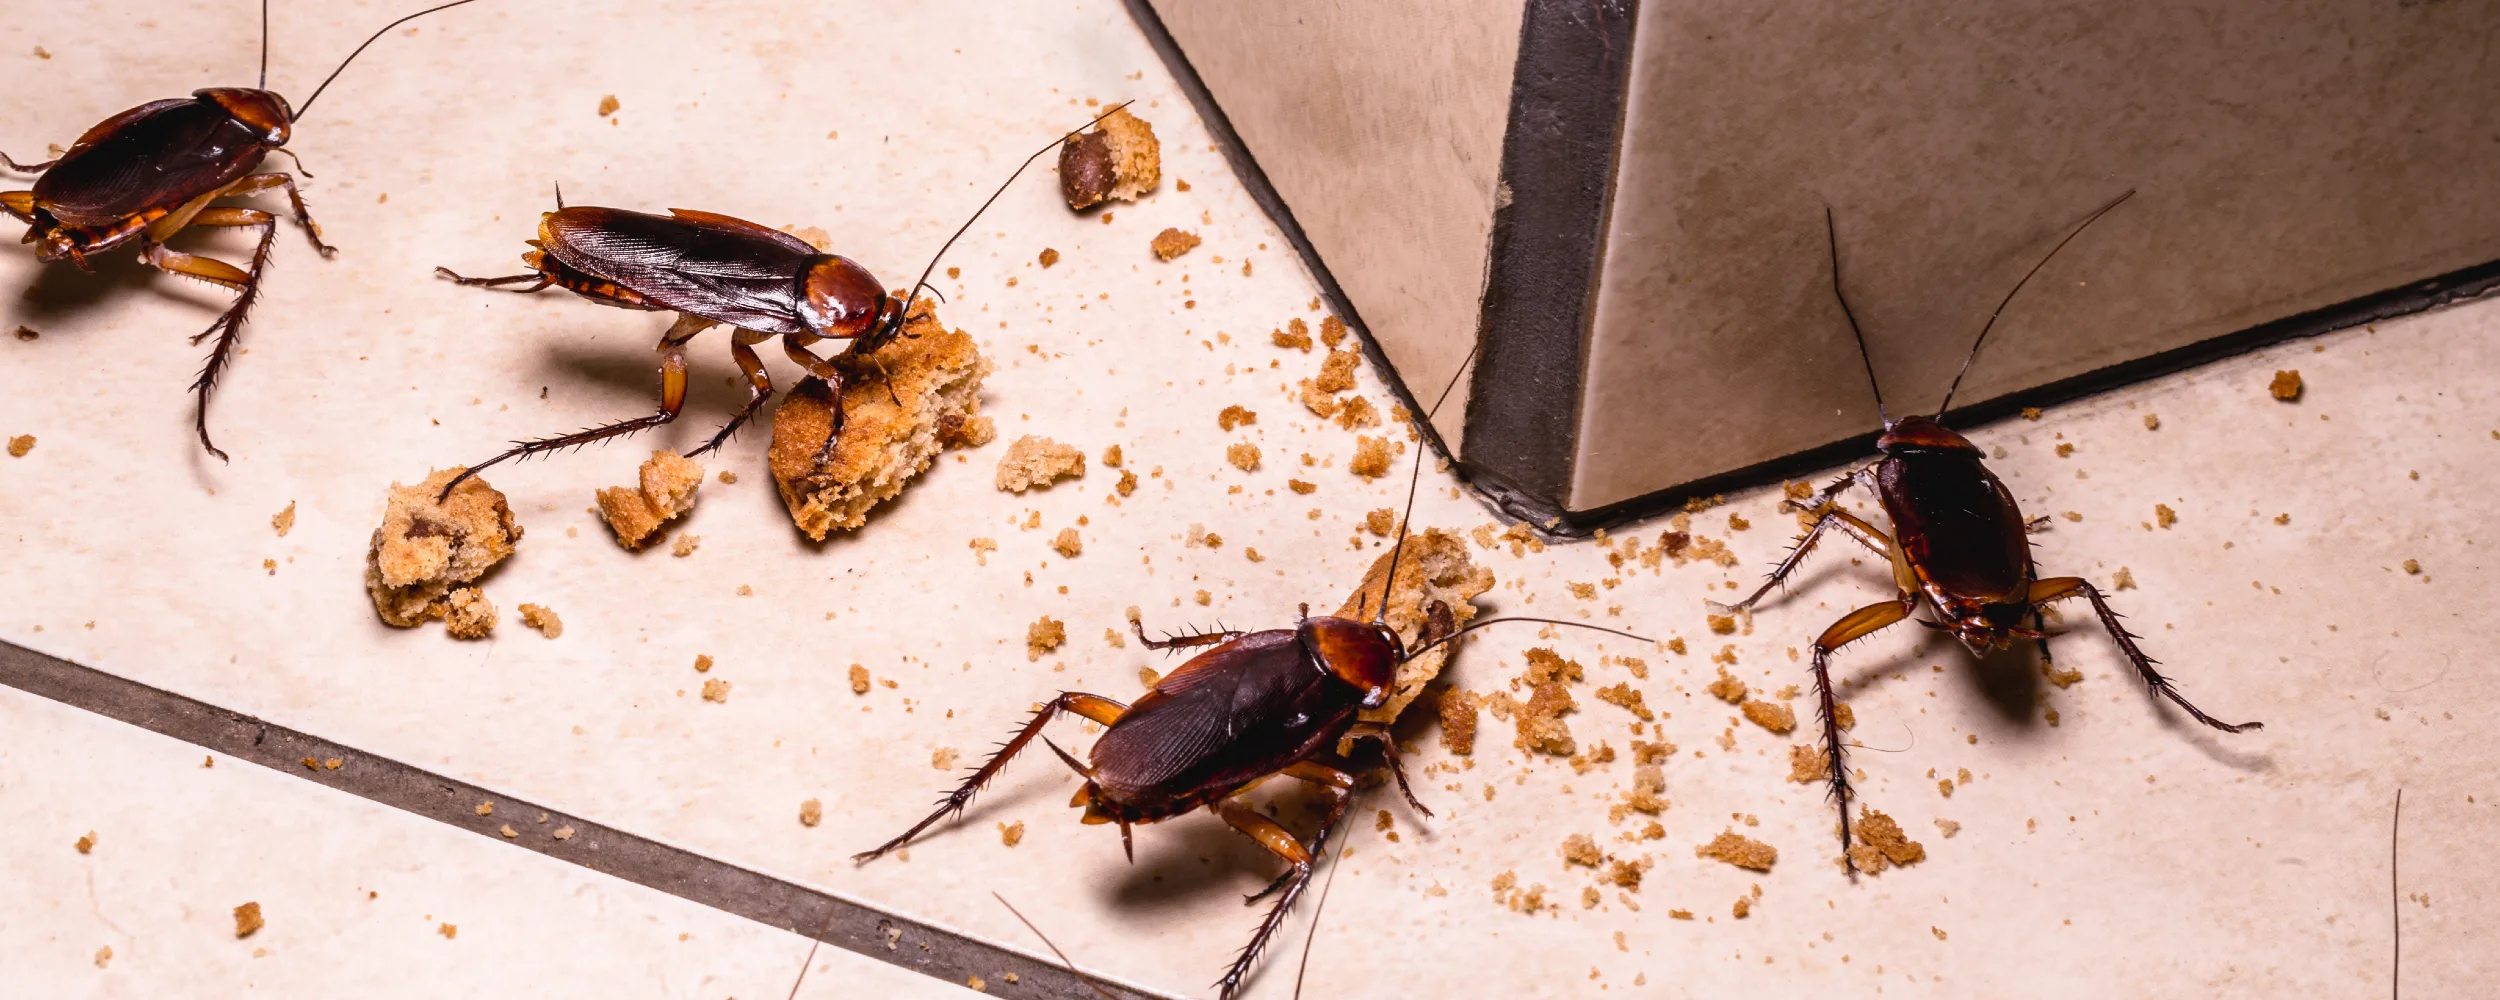 Debugged Blog 5 Ways of Cleaning and Sanitising Surfaces Cockroach Cause Bacteria Causing Diseases